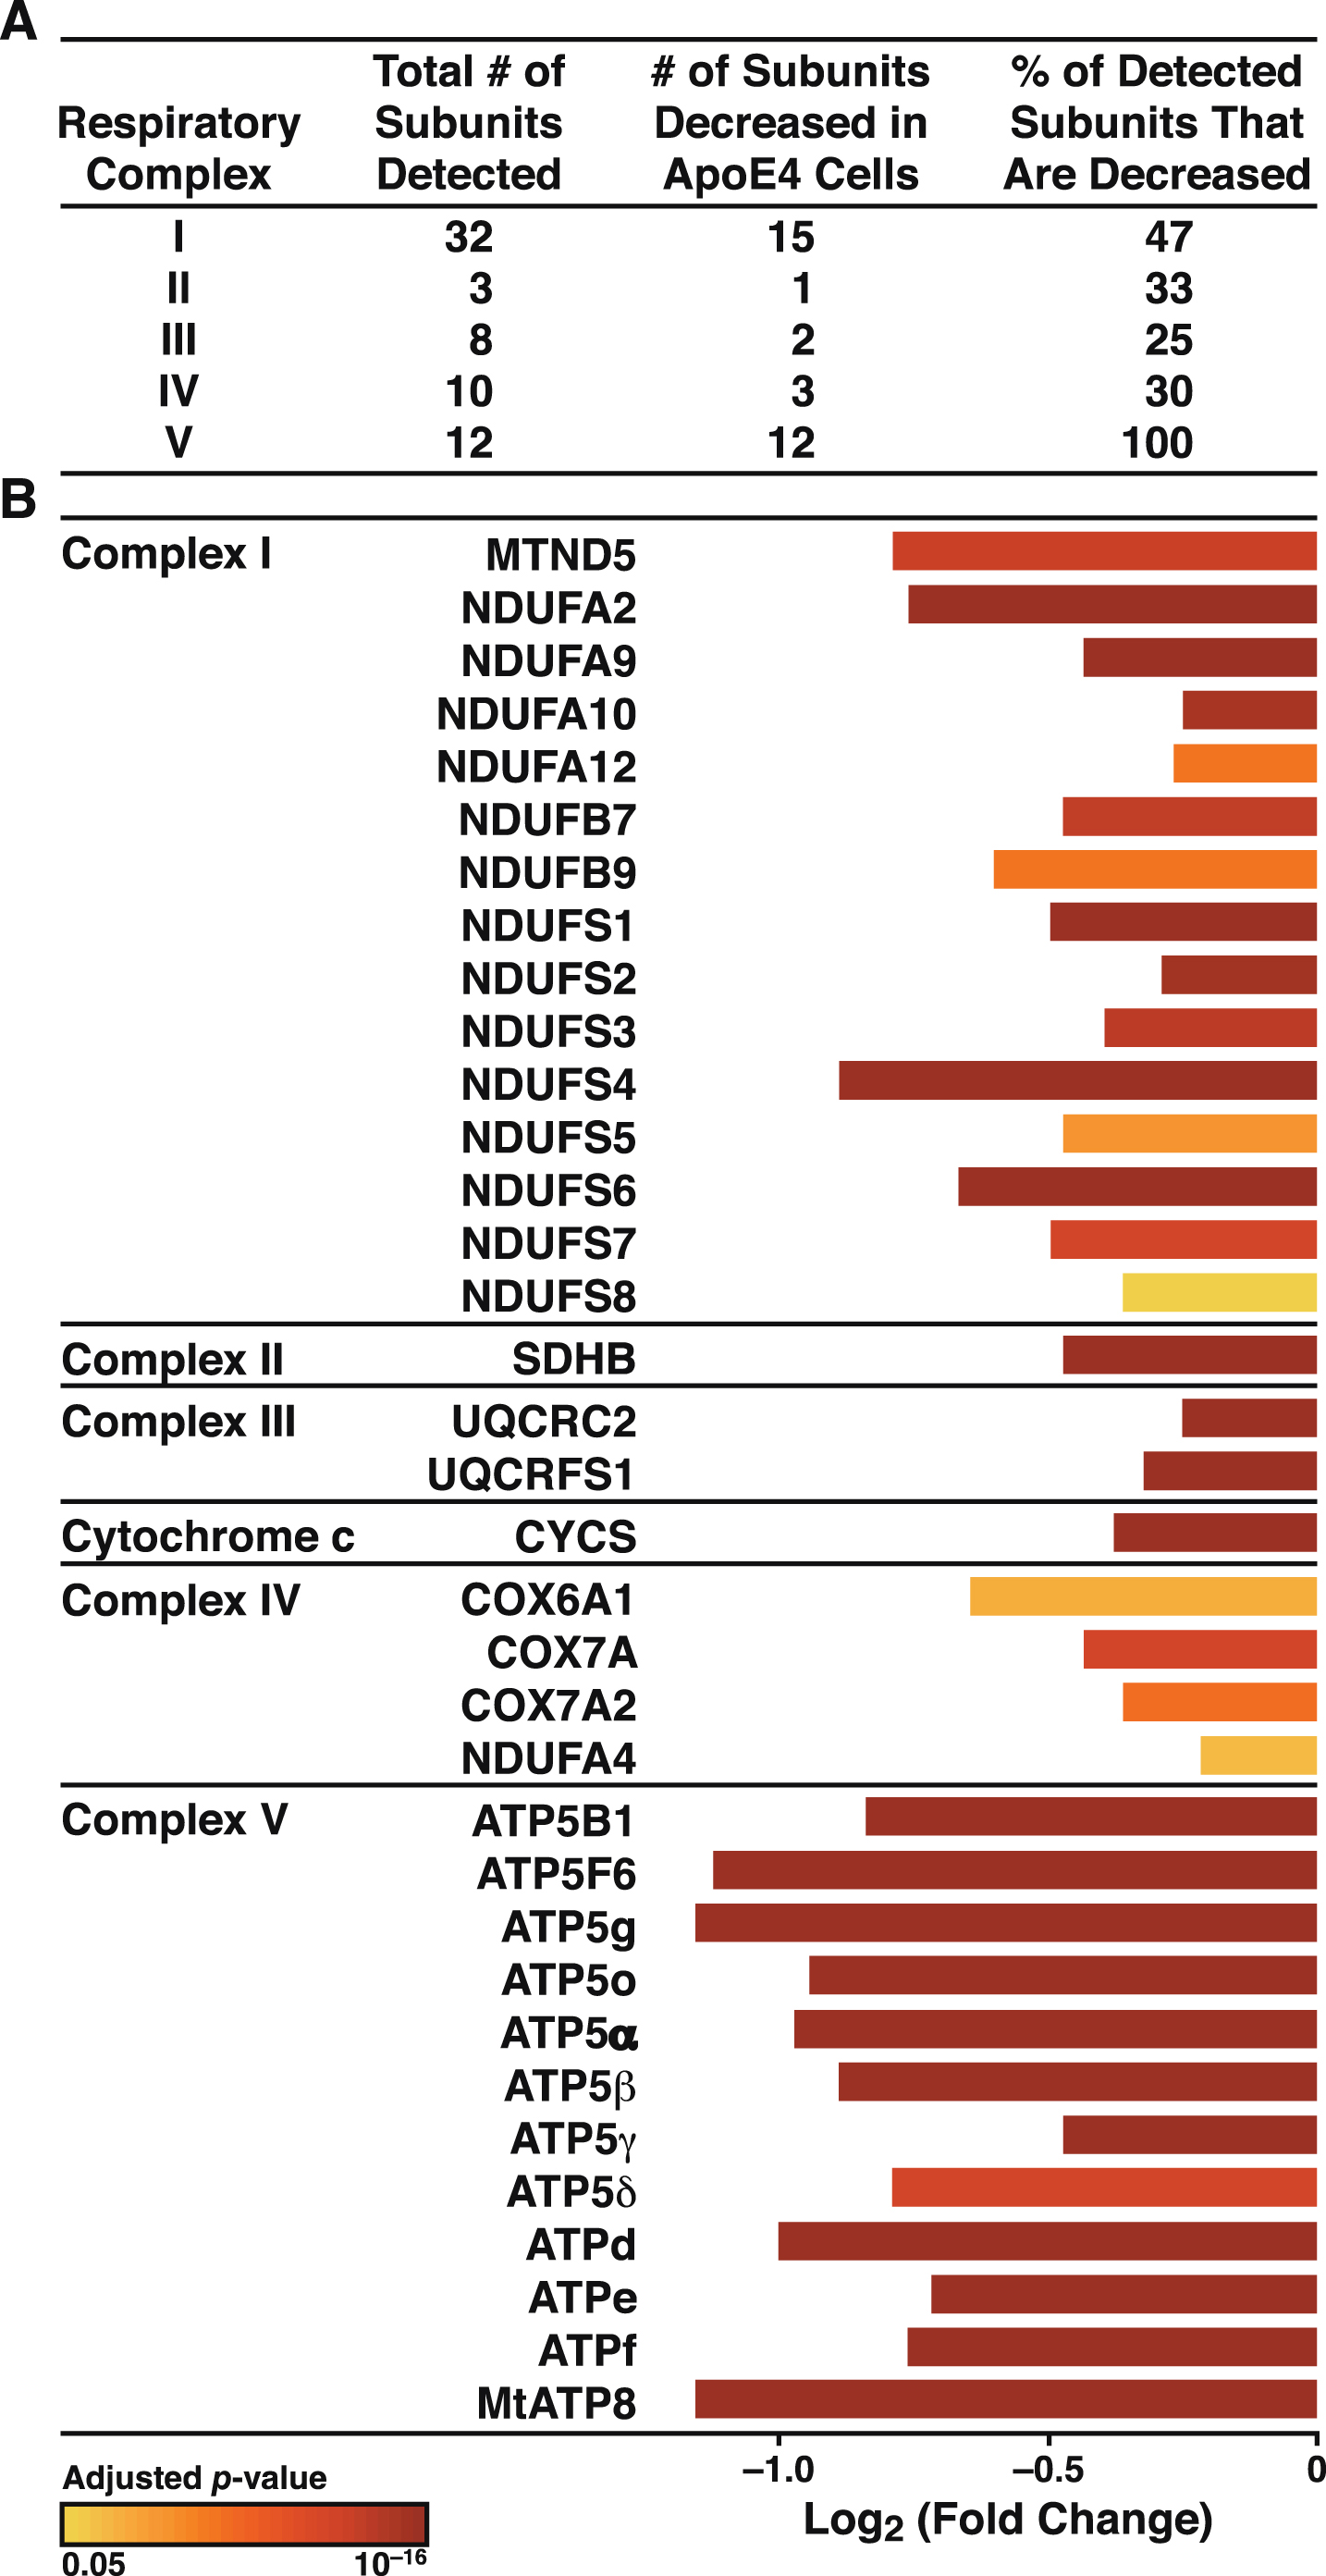 ApoE4 disrupts all five complexes of the mitochondrial OXPHOS system. A) Summary of subunits detected in all five respiratory complexes and the number that were significantly altered (p < 0.05) in N2a-apoE4 versus N2a-apoE3 cells. B) ApoE4 significantly affected the assembly of respiratory subunits. Bar colors indicate p values for differences in expression levels between N2a-apoE4 and N2a-apoE3 cells.